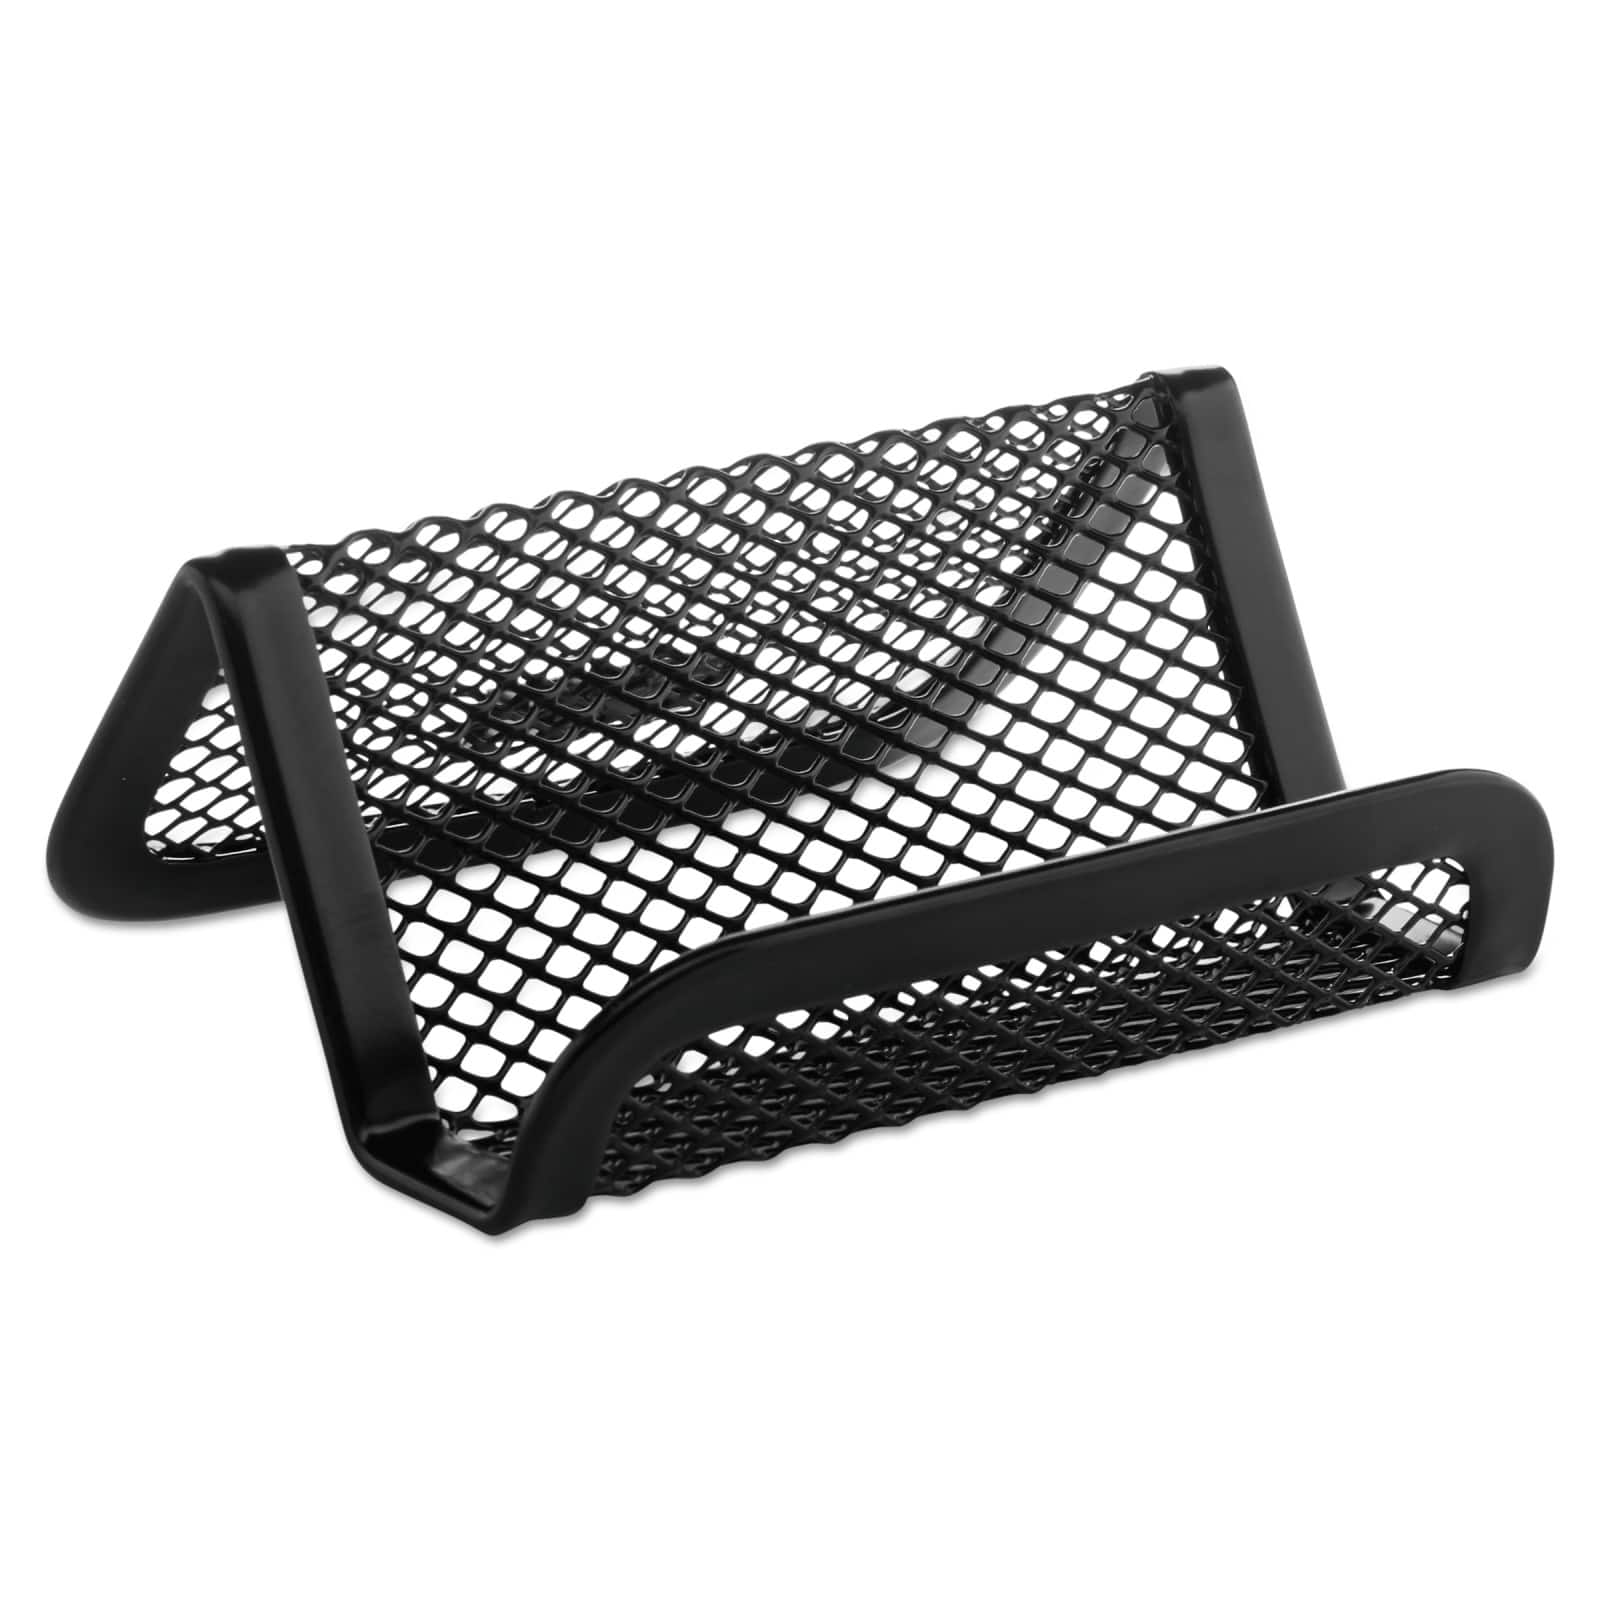 Rubbermaid Business Card Holders Black Mesh NEW look QTY 2 